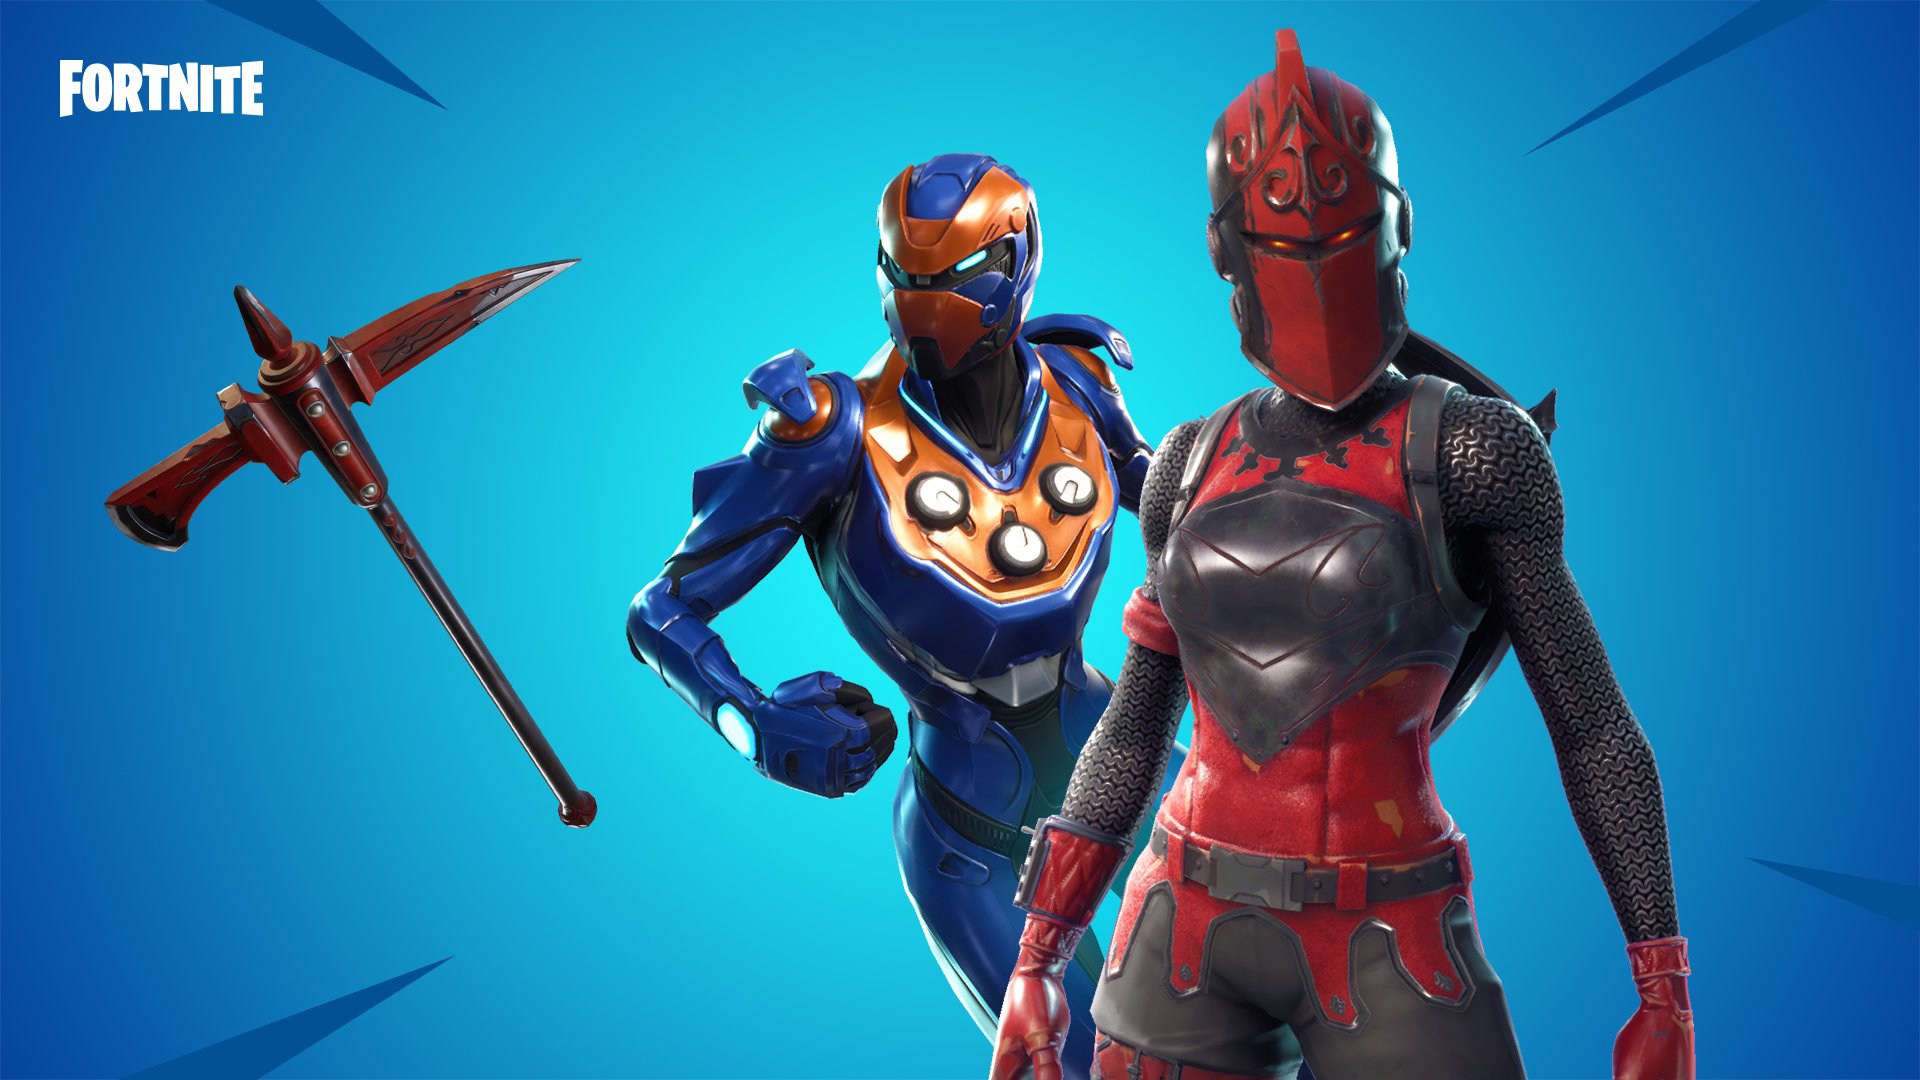 At hoppe medier Klinik Fortnite Red Knight Skin - Character, PNG, Images - Pro Game Guides